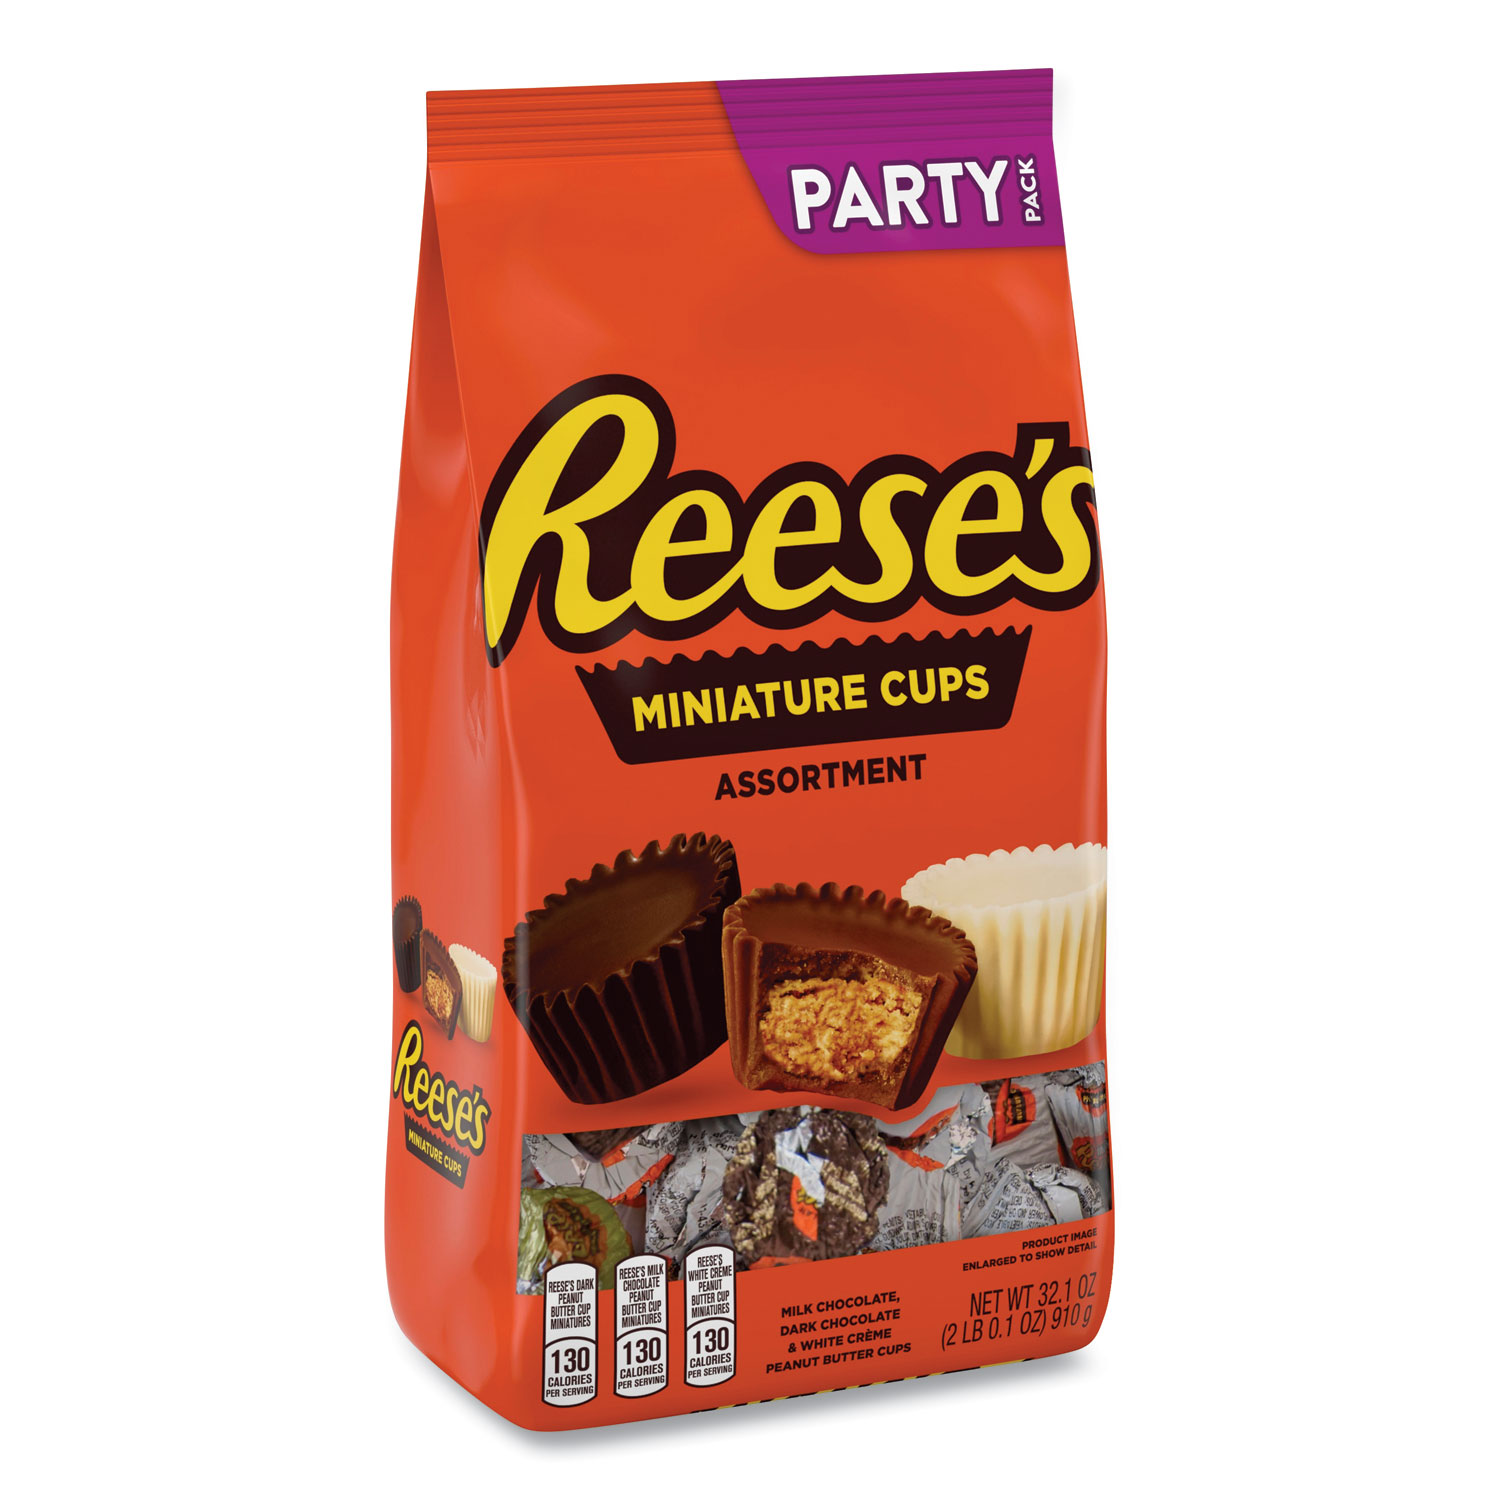  Reese's 43165 Party Pack Miniatures Assortment, 32.1 oz Bag, Free Delivery in 1-4 Business Days (GRR24600413) 